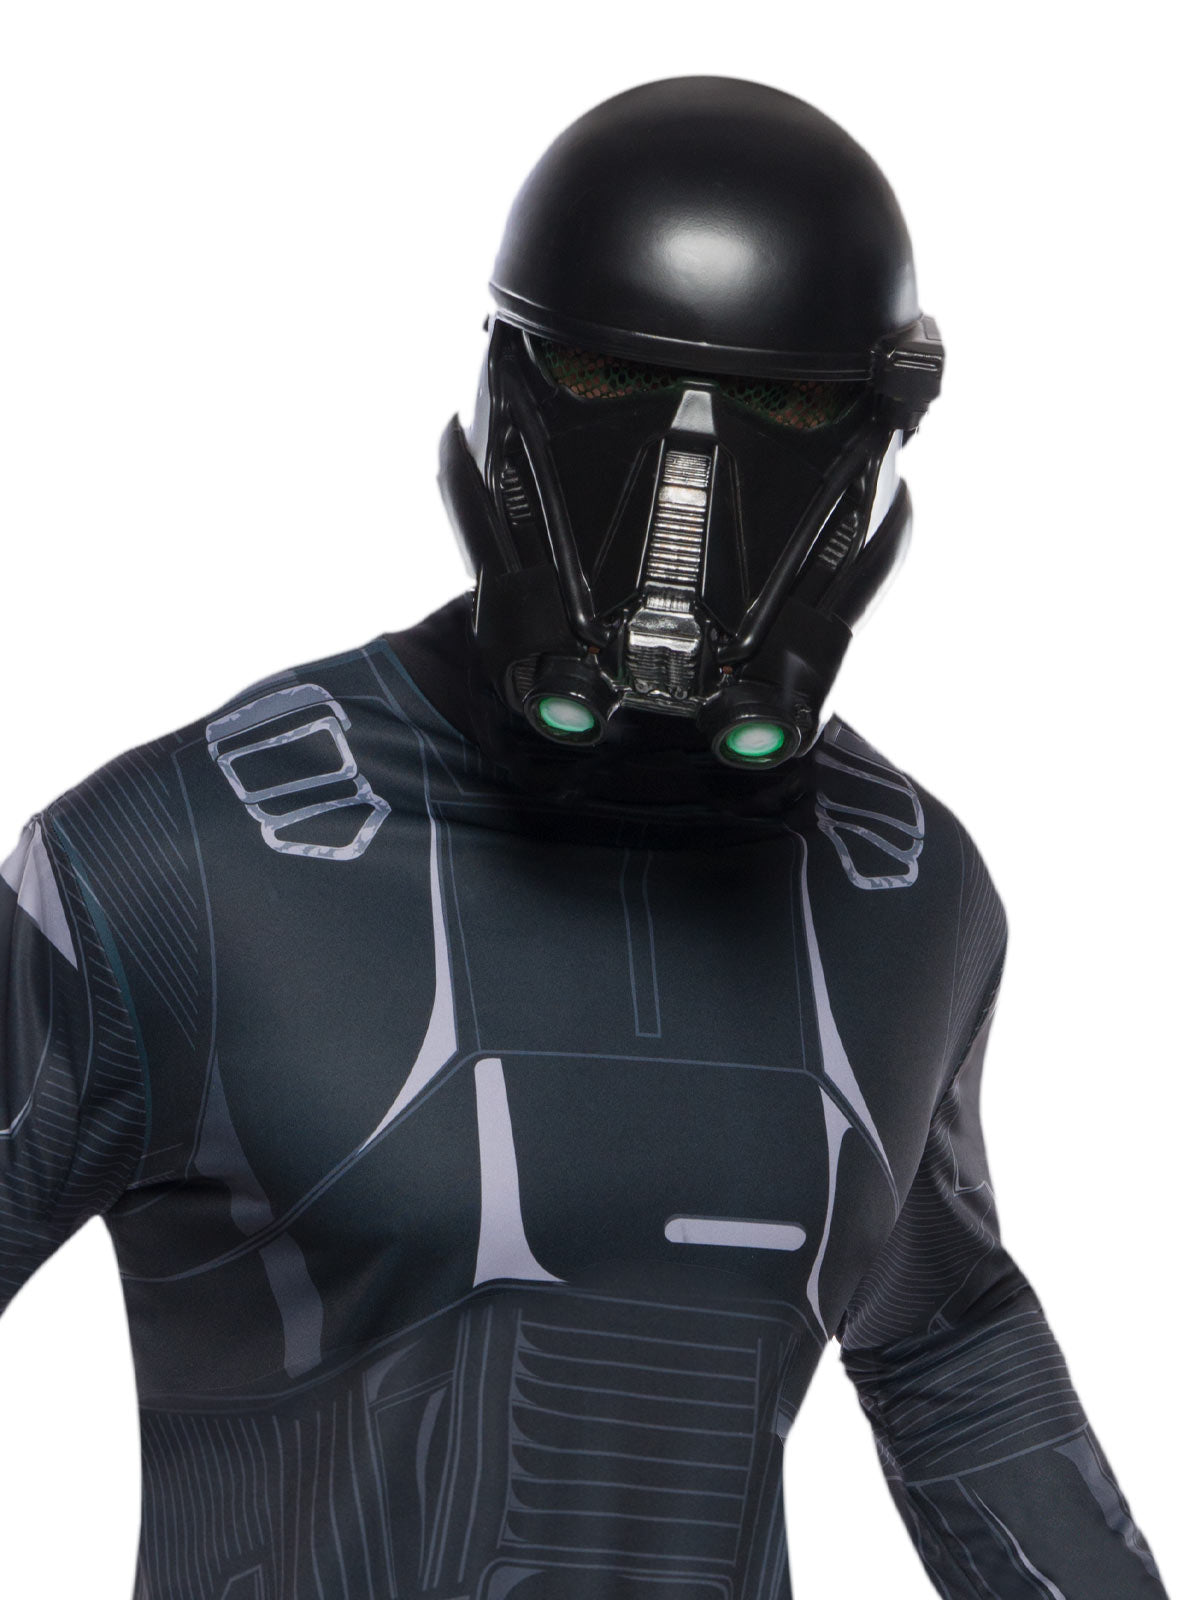 Rubies Death Trooper Rogue One Costume Adult (Size Standard)